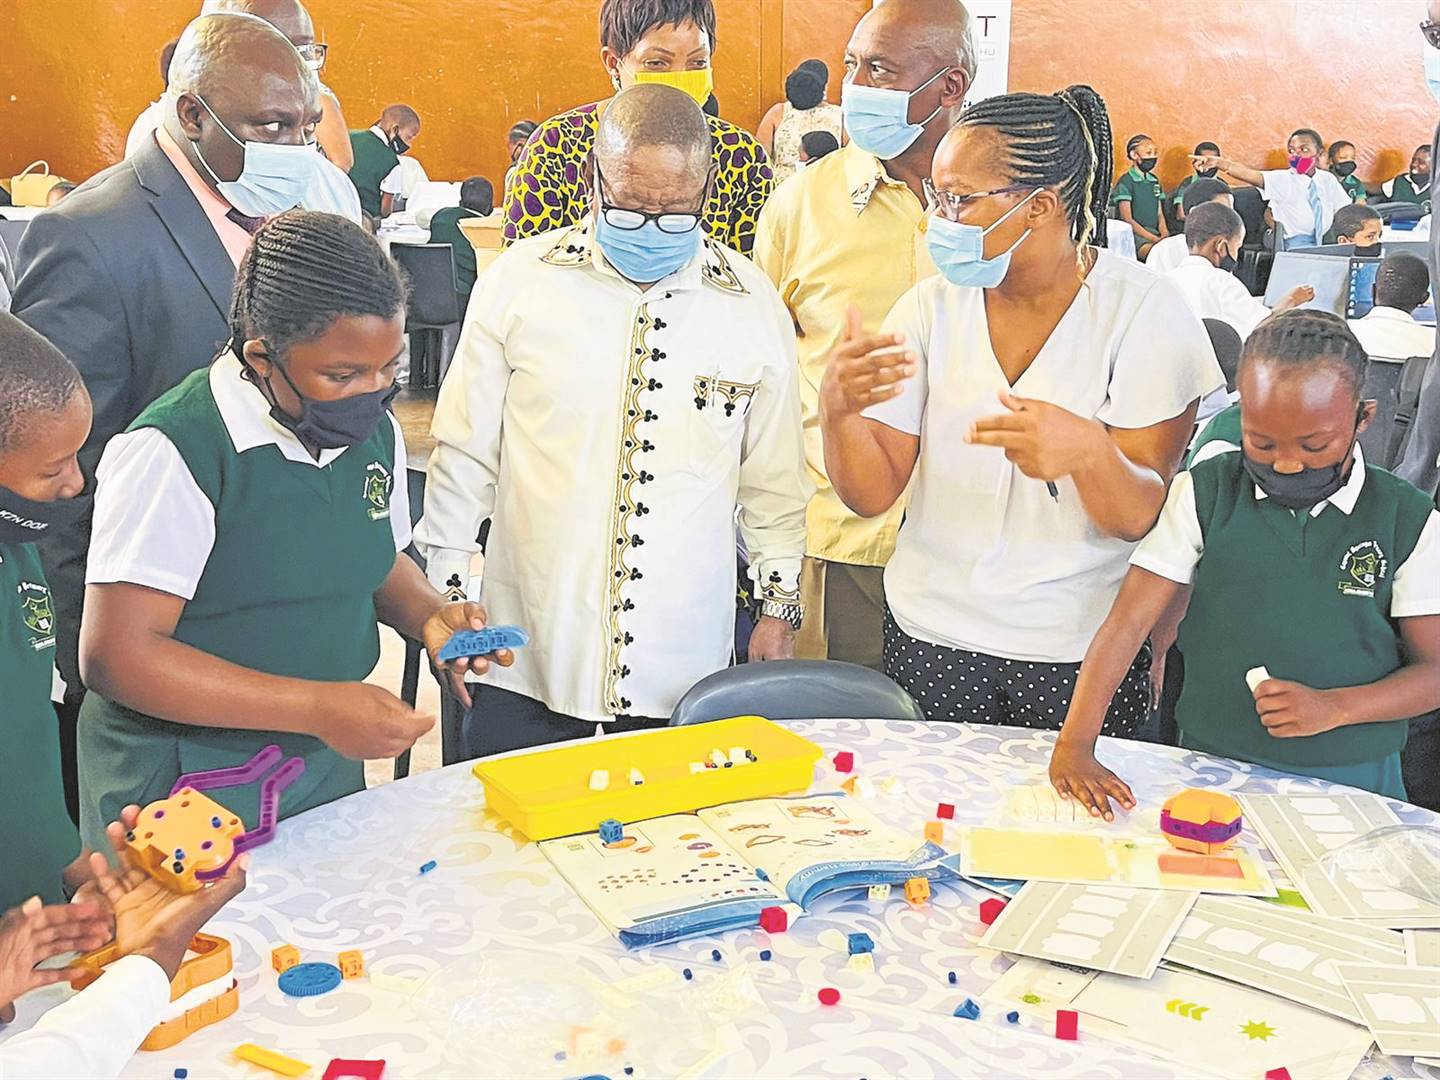 Minister of Higher Education and Training, Blade Nzimande ( in the middle), at Jabula Combined School in the Midlands where science and innovation learning tools were handed out.